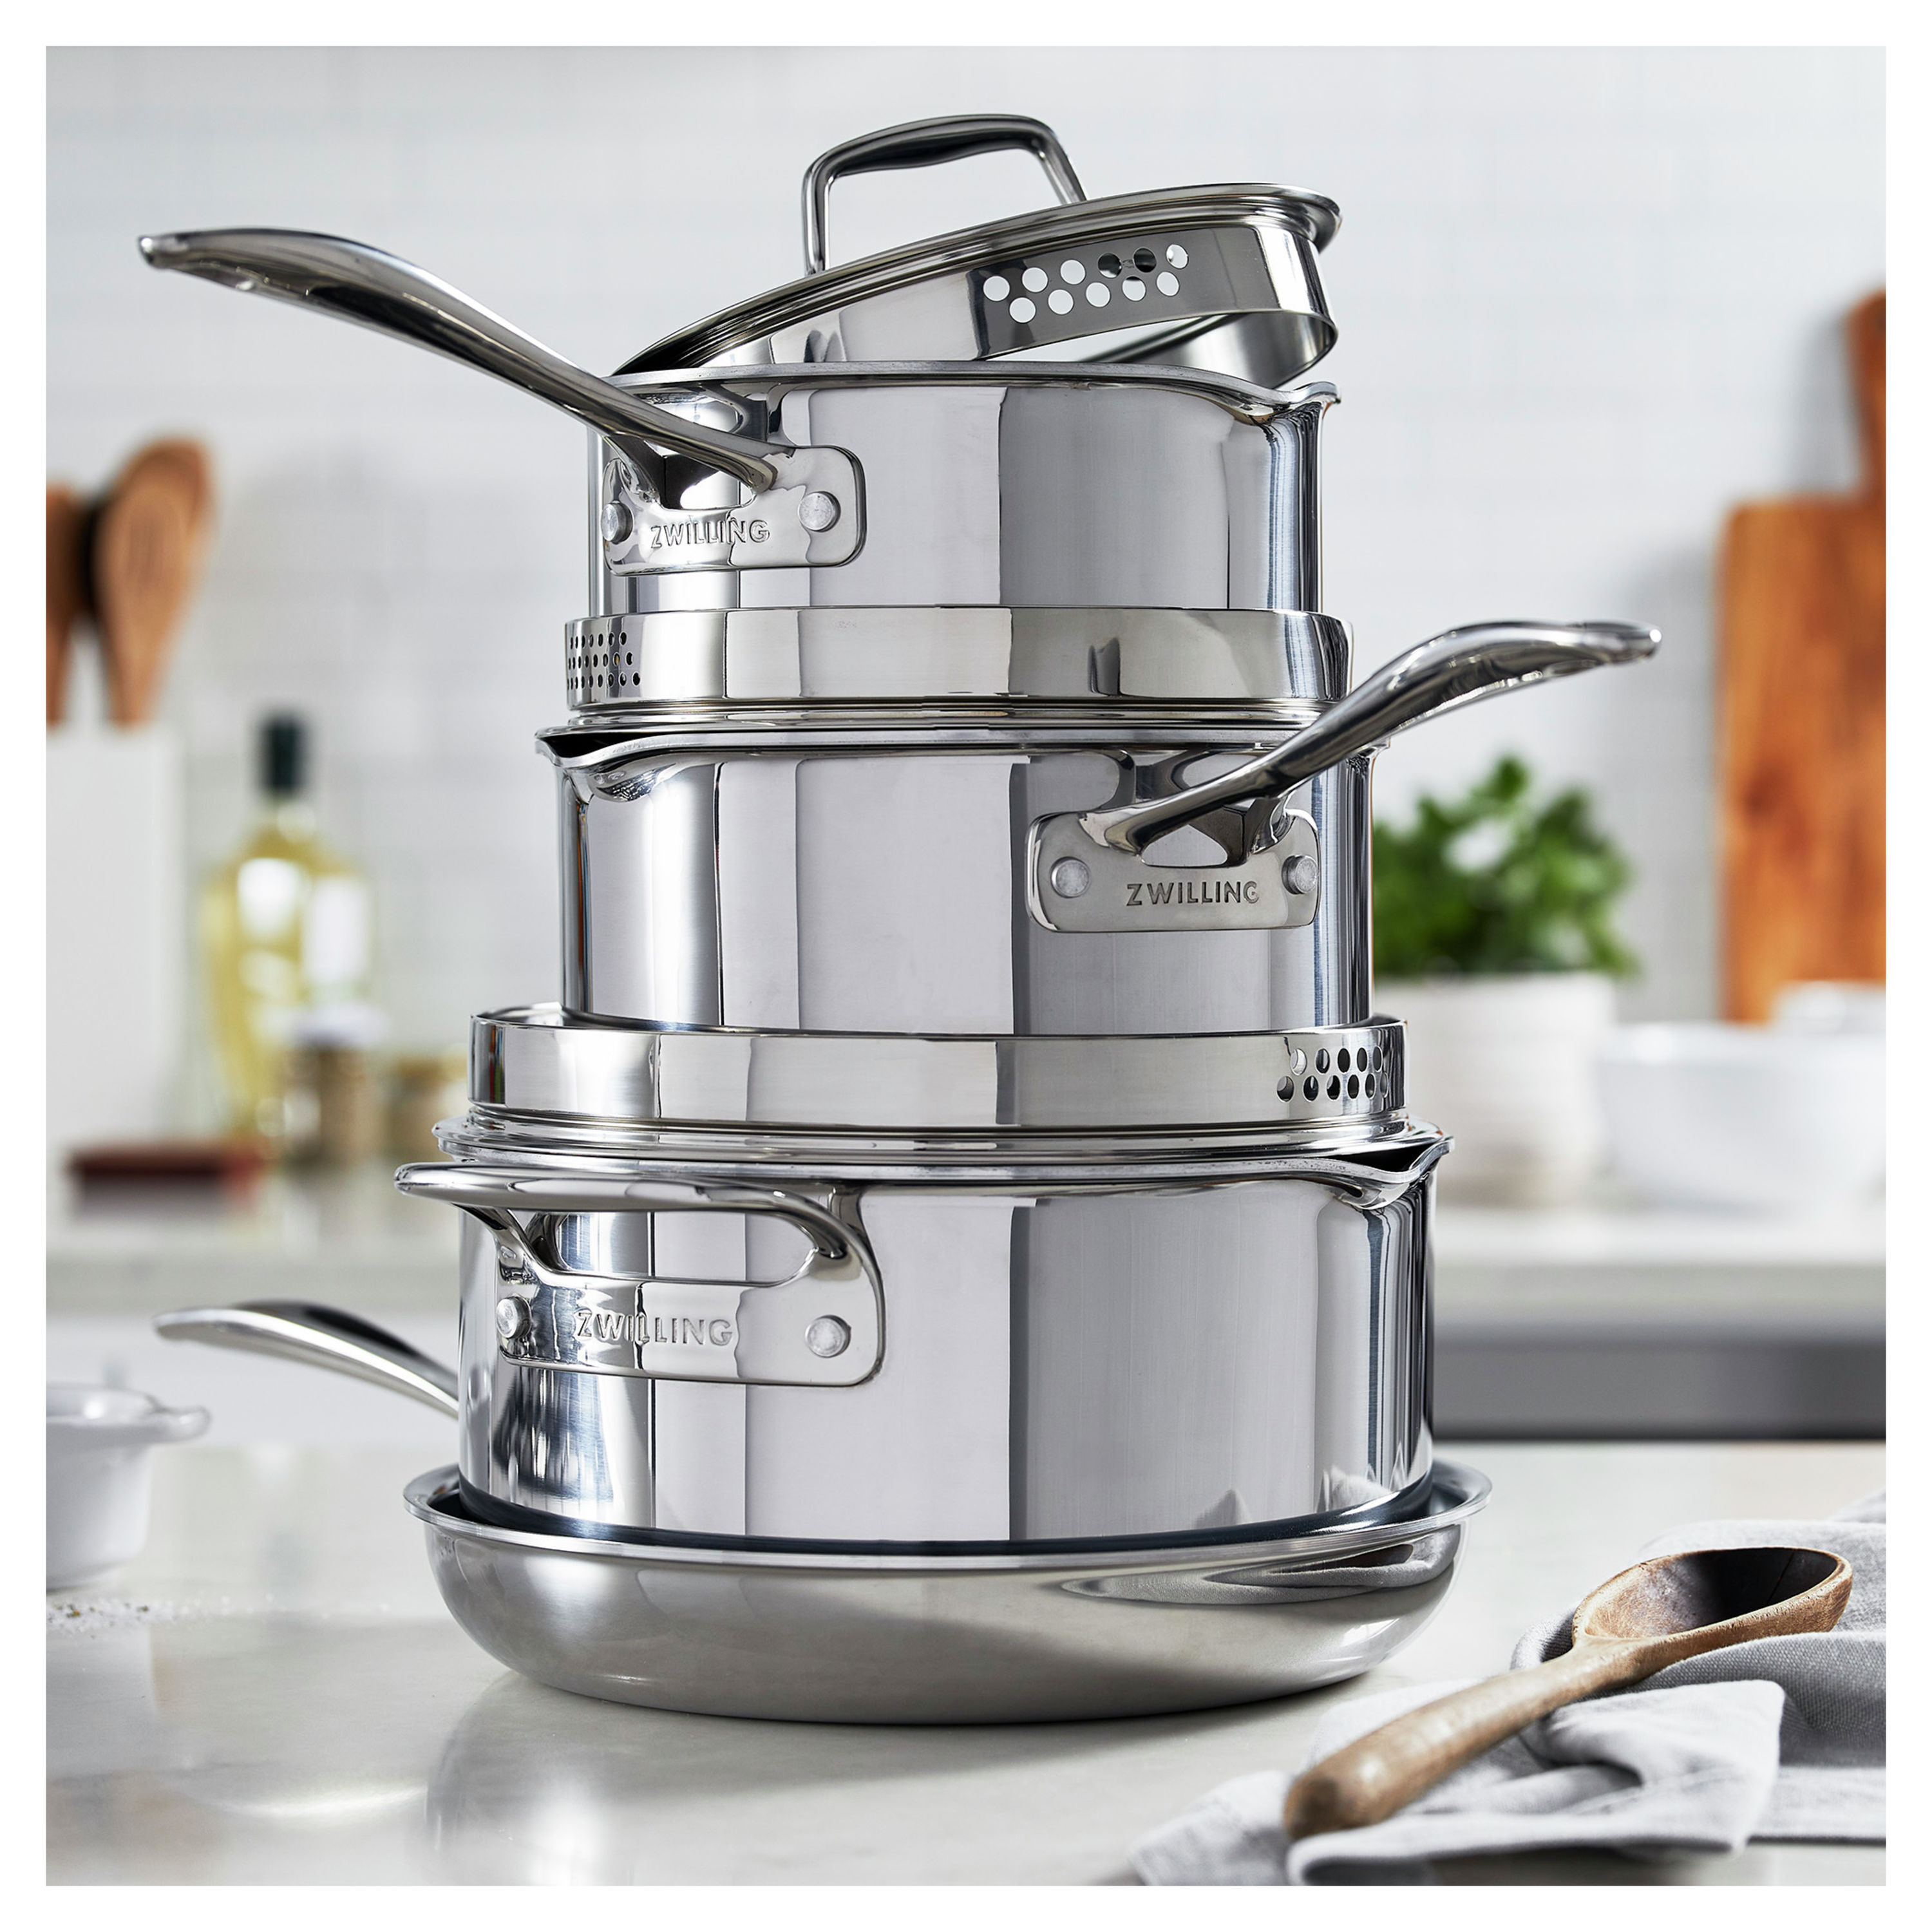 Details about   Covered Stock Pot Stainless Steel Home Kitchen Soup Cookware Glass Lid 16 Quart 